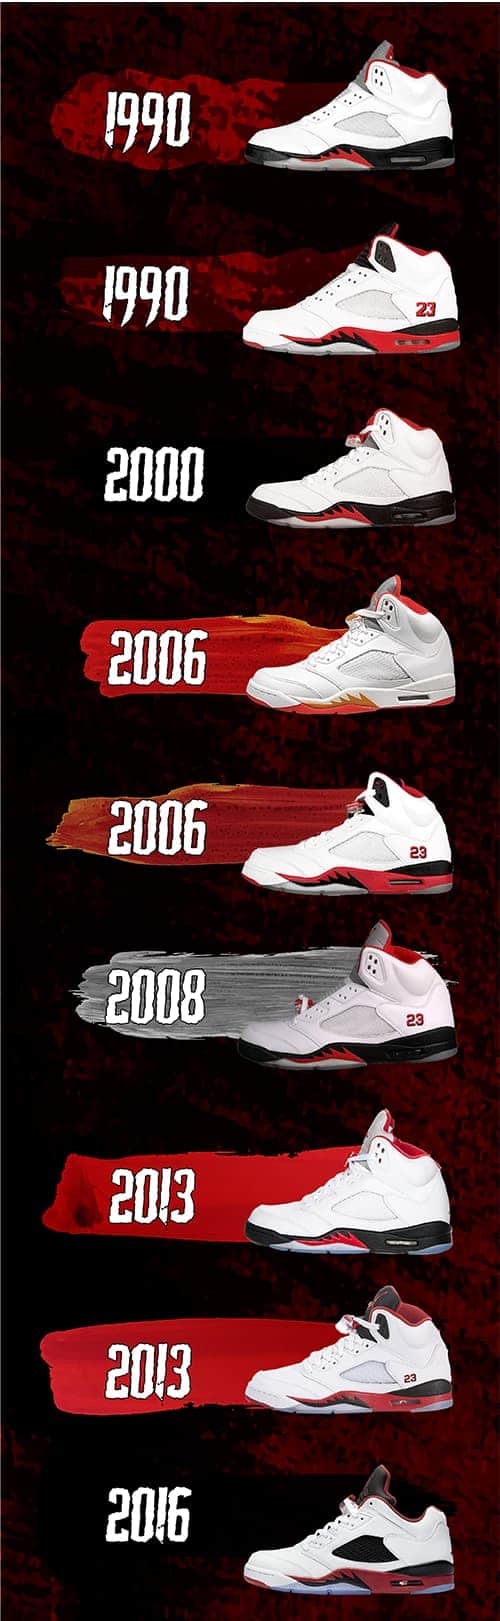 1990 fire red 5s